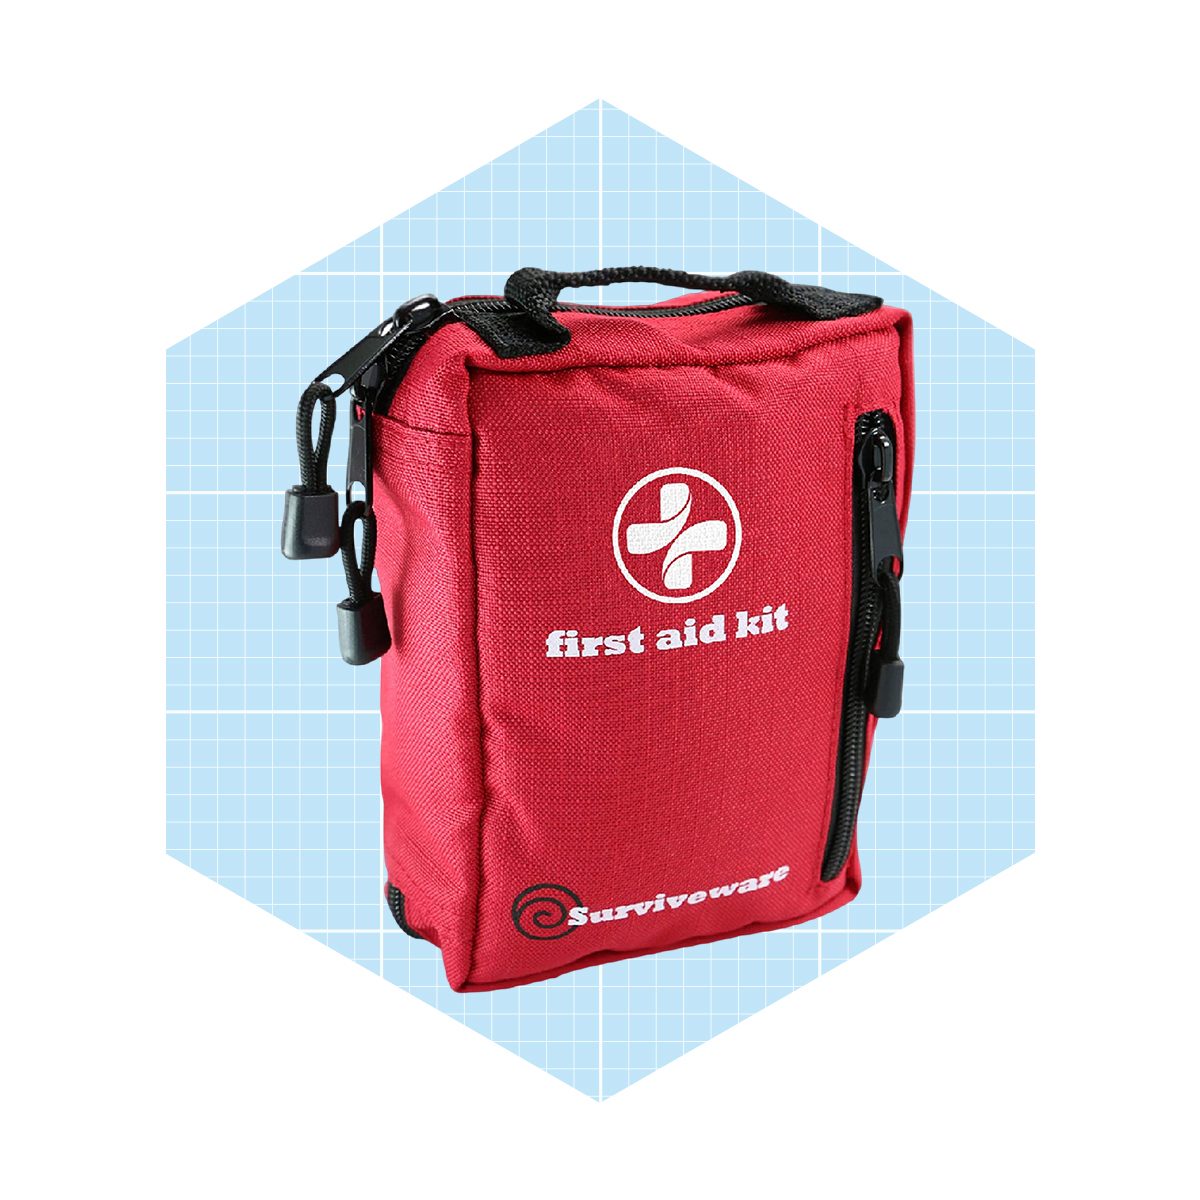 <p>Always have a first aid kit in your car in case of emergencies. The <a href="https://www.amazon.com/Surviveware-Survival-Labeled-Compartments-Outdoors/dp/B01HGSLB6K" rel="noopener noreferrer">Survivewear Comprehensive First Aid Kit</a> has over 100 medical essentials organized in labeled compartments. It includes clear instructions and diagrams to walk you through <a href="https://www.familyhandyman.com/list/summer-car-emergency-kit/" rel="noopener noreferrer">medical emergencies</a>, even if you're not a trained professional. Easily stash this lightweight and compact kit in your backpack, trunk or under the seat of a car. It's also durable, water-resistant and made of high-quality materials that can withstand harsh conditions.</p> <p class="listicle-page__cta-button-shop"><a class="shop-btn" href="https://www.amazon.com/Surviveware-Survival-Labeled-Compartments-Outdoors/dp/B01HGSLB6K">Shop Now</a></p>